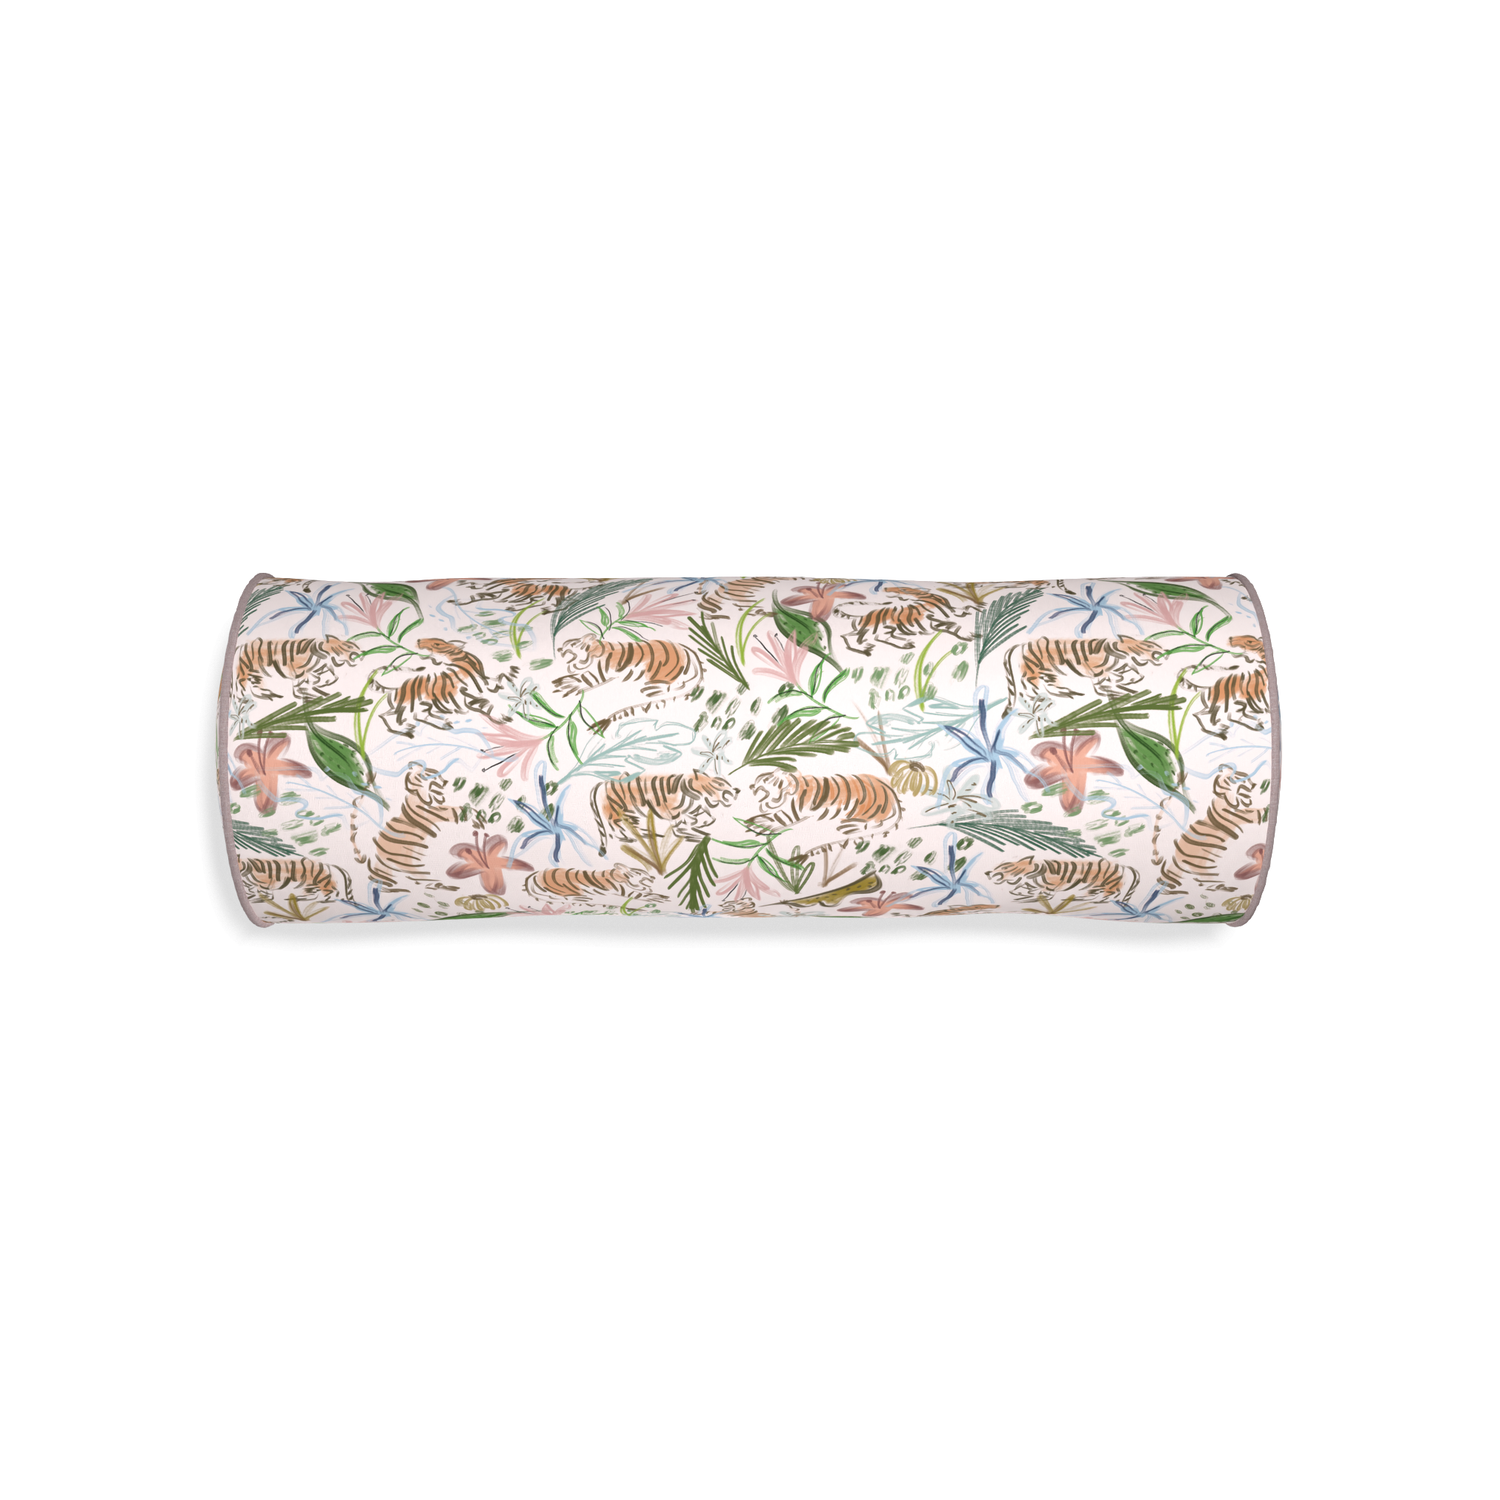 Bolster frida pink custom pink chinoiserie tigerpillow with orchid piping on white background